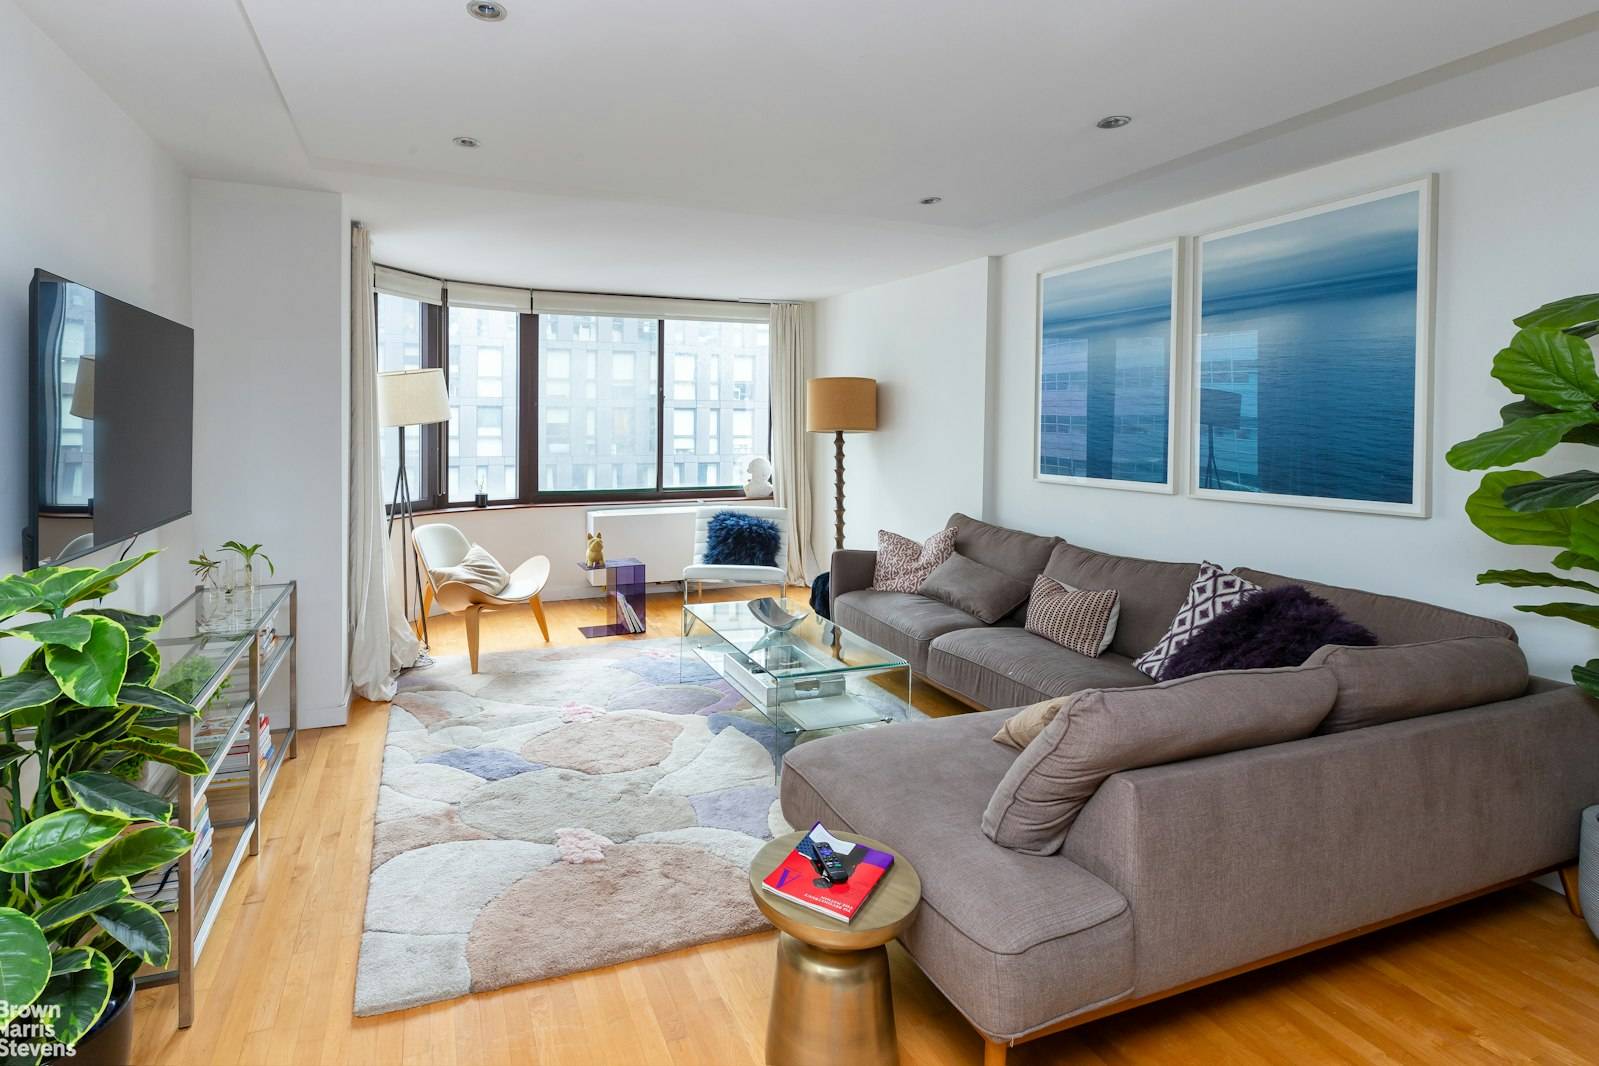 Welcome home to this stunning 3BR 2BA Condo with a very unique layout and amazing design.